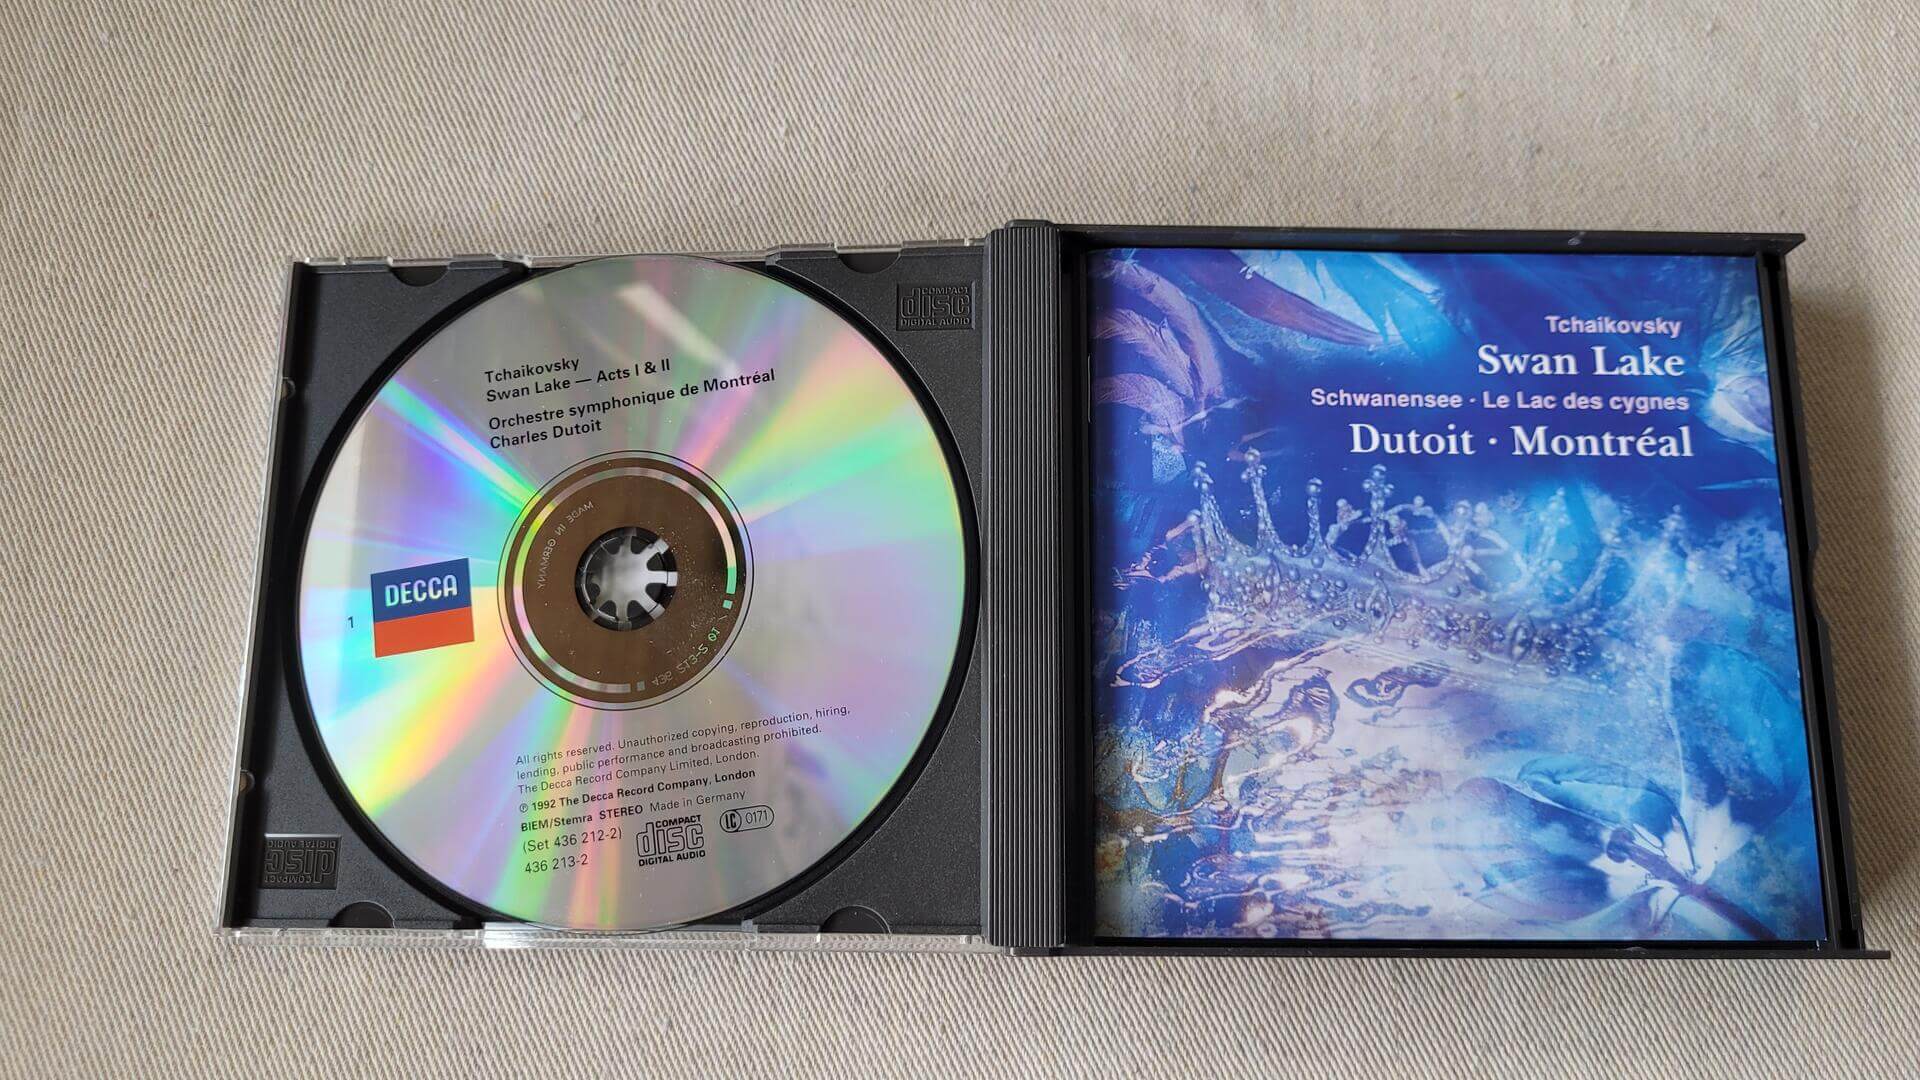 Tchaikovsky Swan Lake 2 classical CD box by Dutoit & Orchestre symphonique de Montréal by Decca in 1992. Great gift and collectible w 40 page booklet